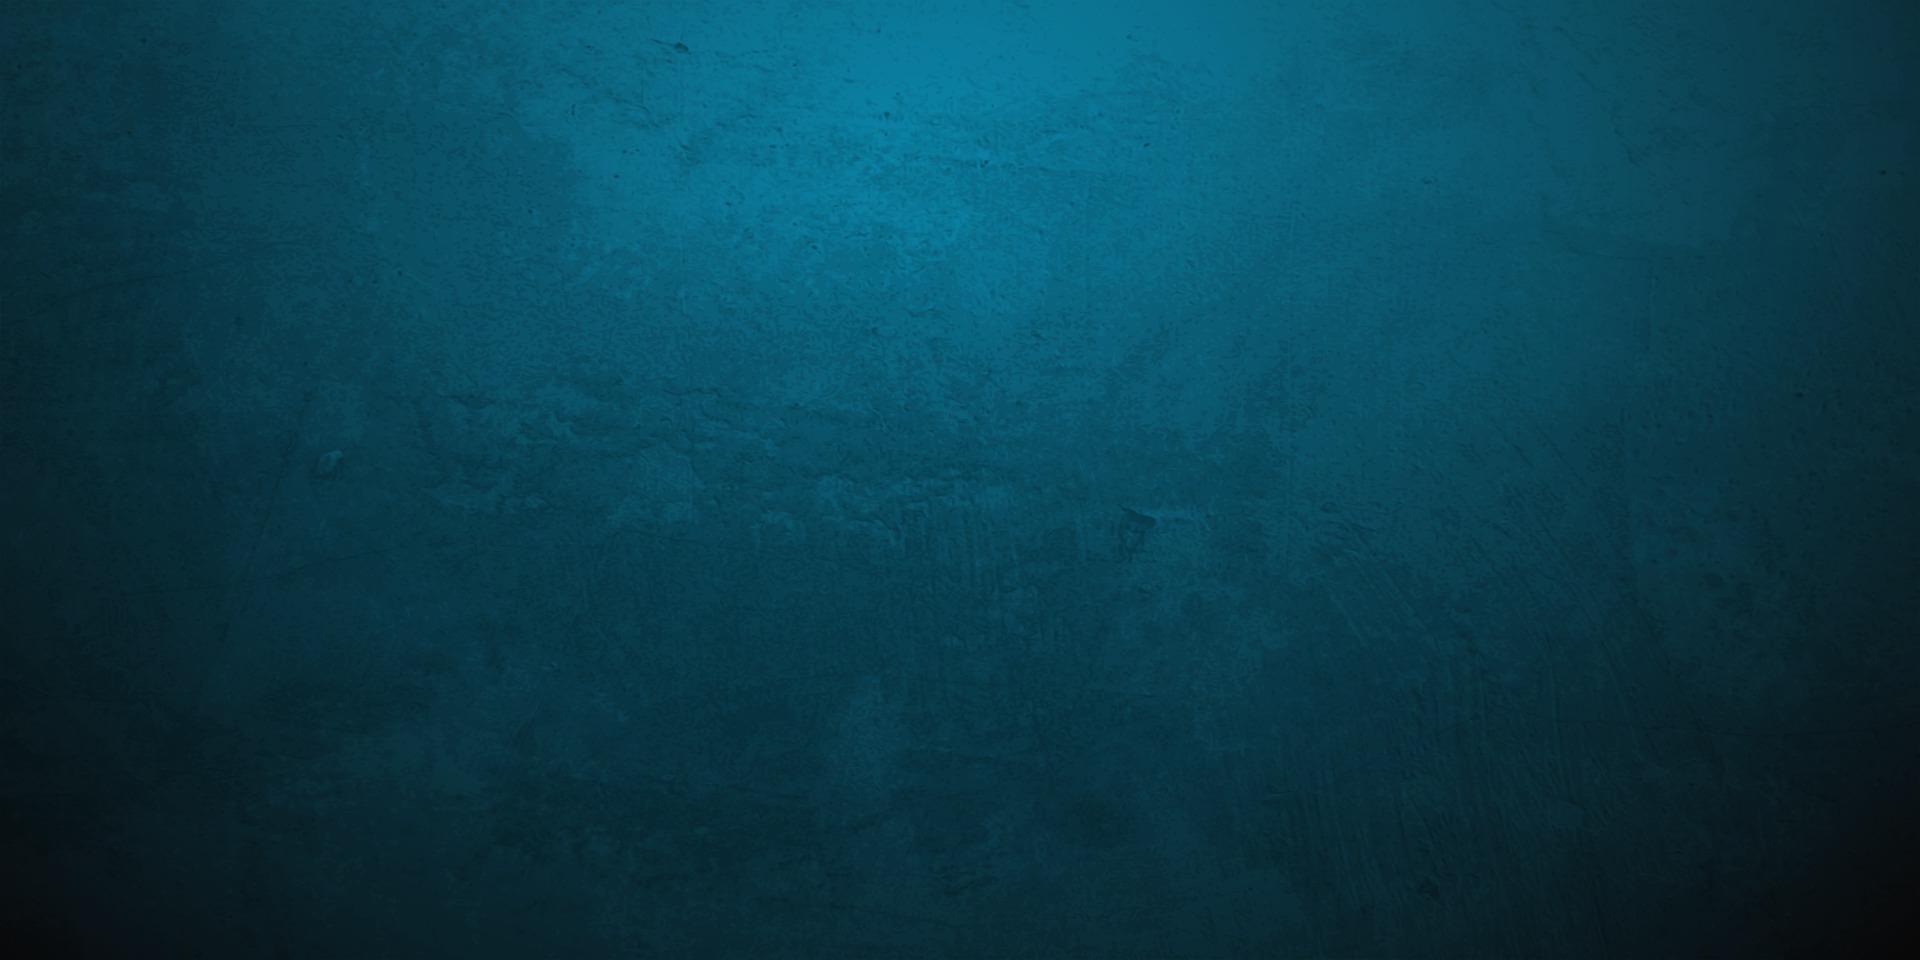 Abstract Blue Grunge Texture Background vector